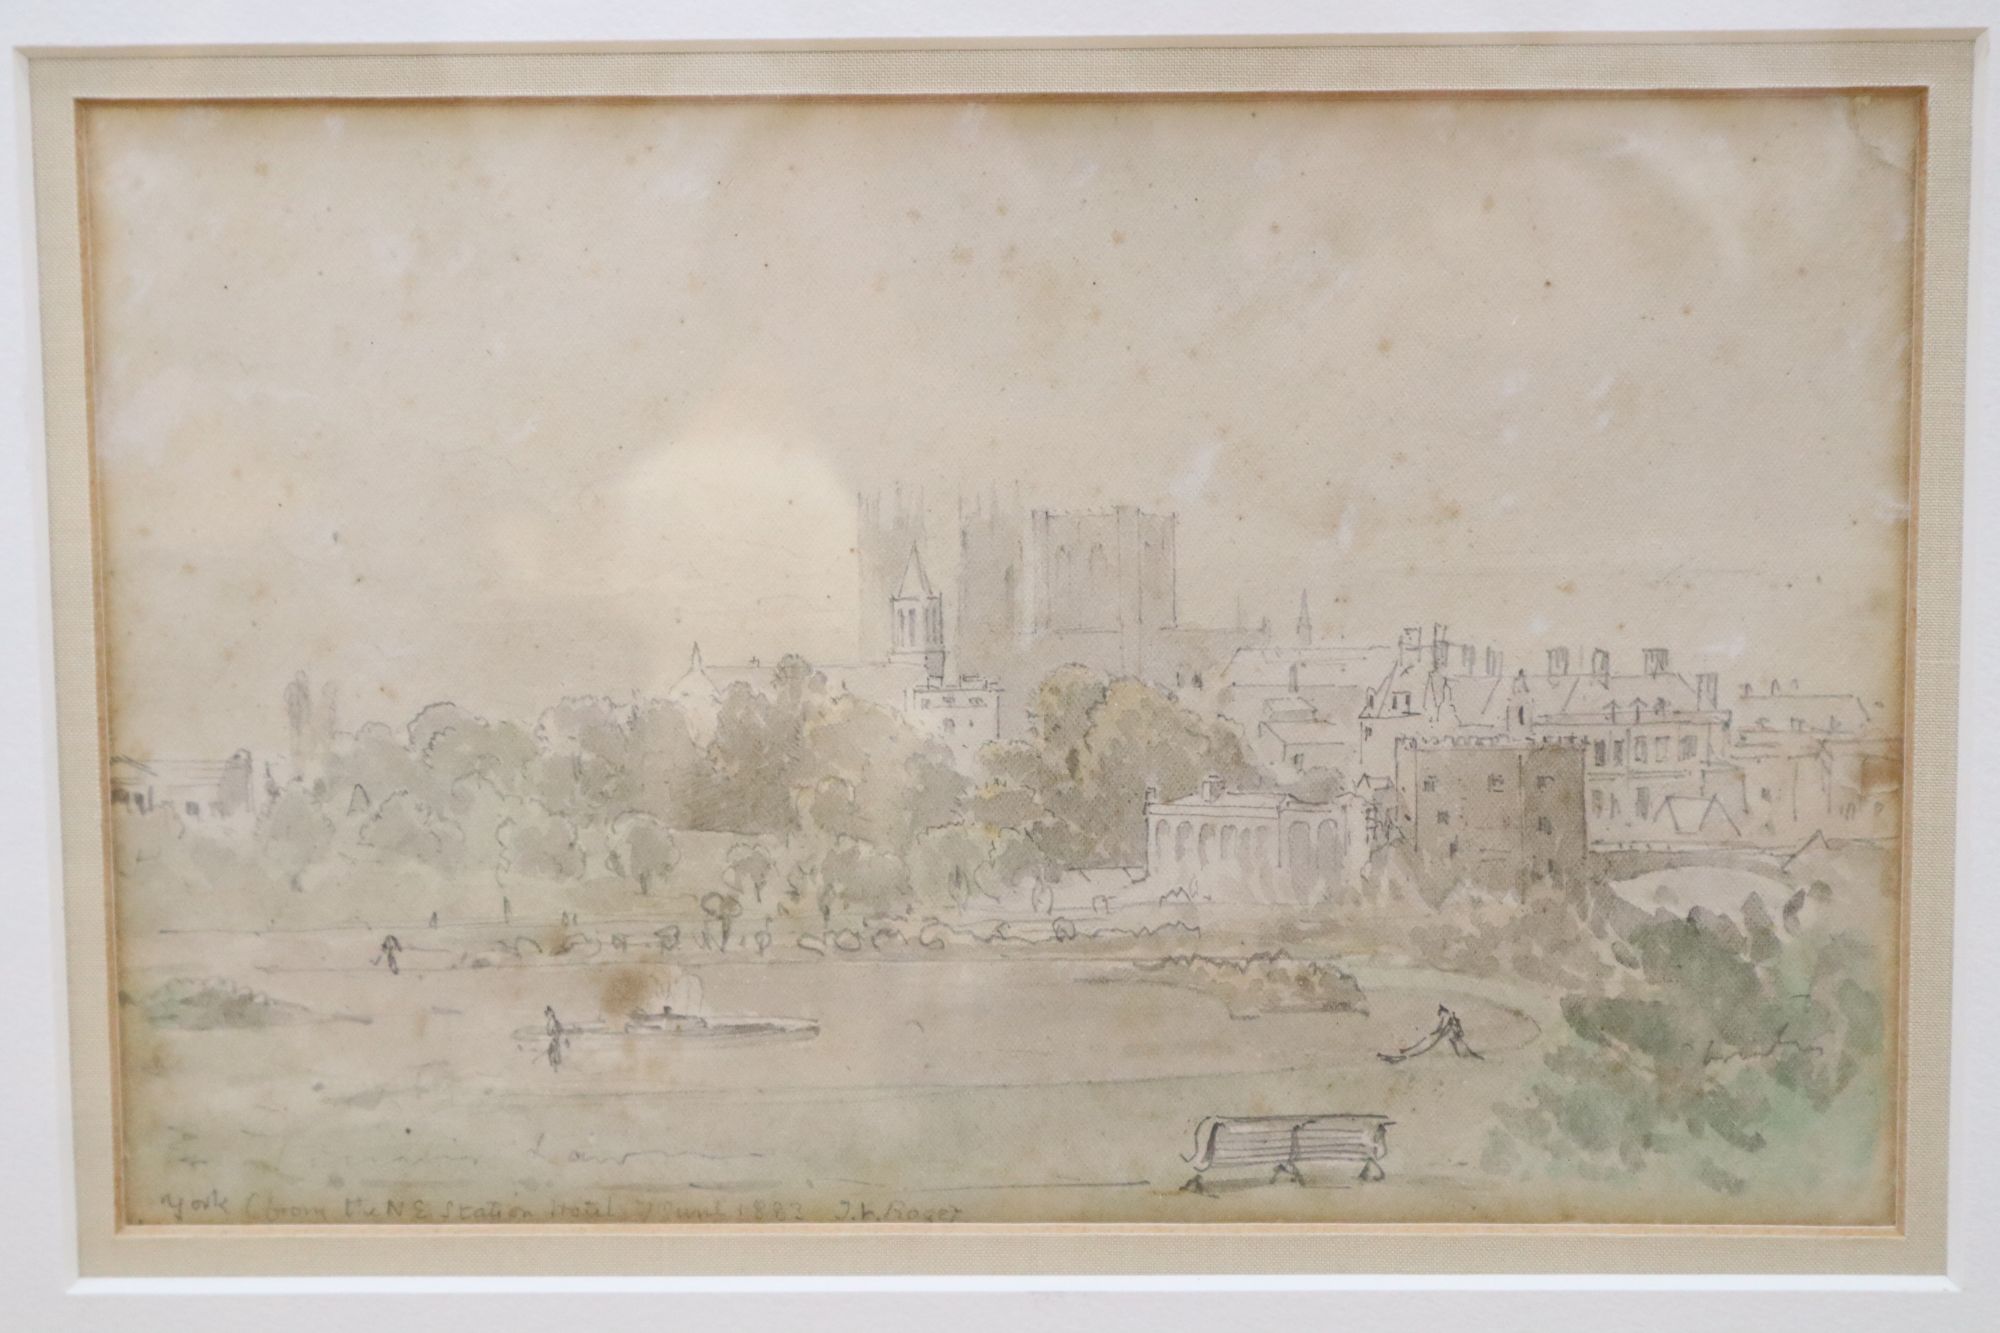 J* Roger (19th century), Hastings sea front with shipping and another of York, signed and inscribed, pencil and wash, largest 19 x 29cm